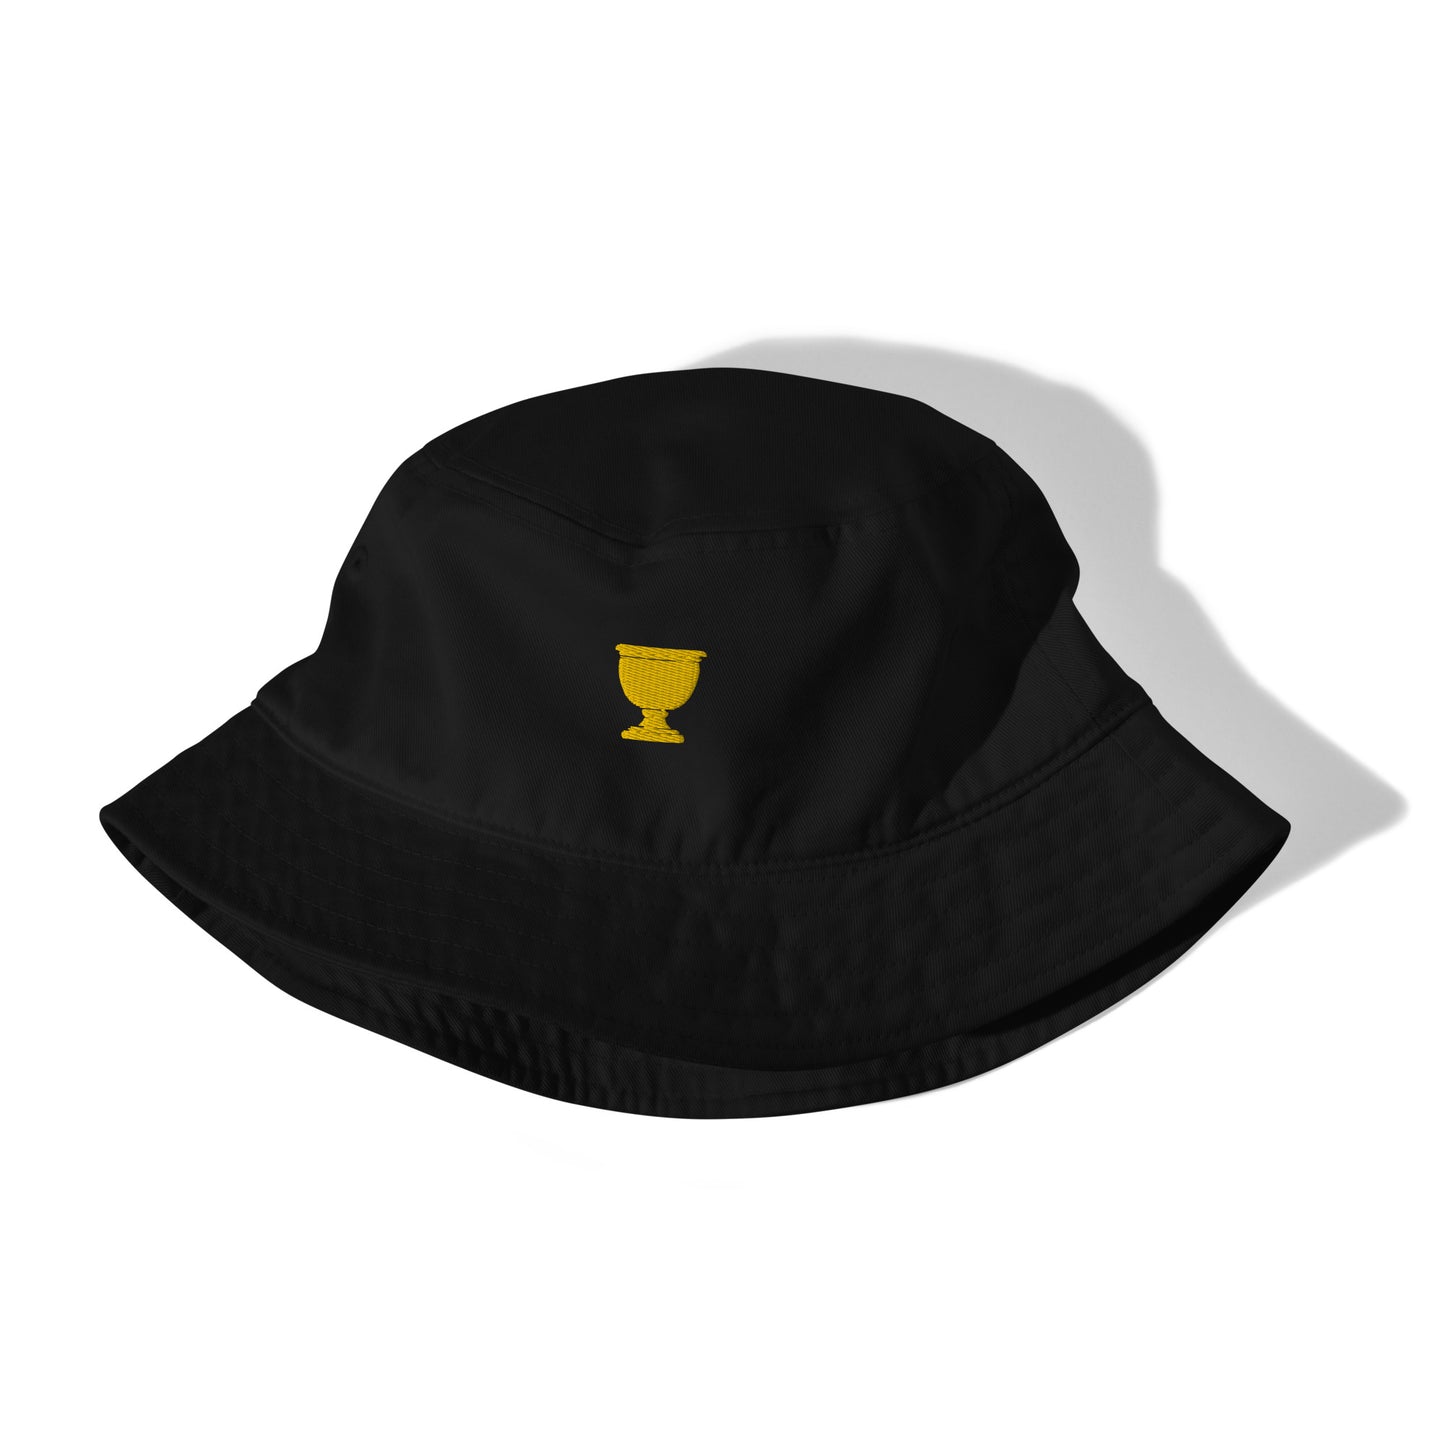 President's Cup Bucket Hat / president's Cup 2022 Organic bucket hat